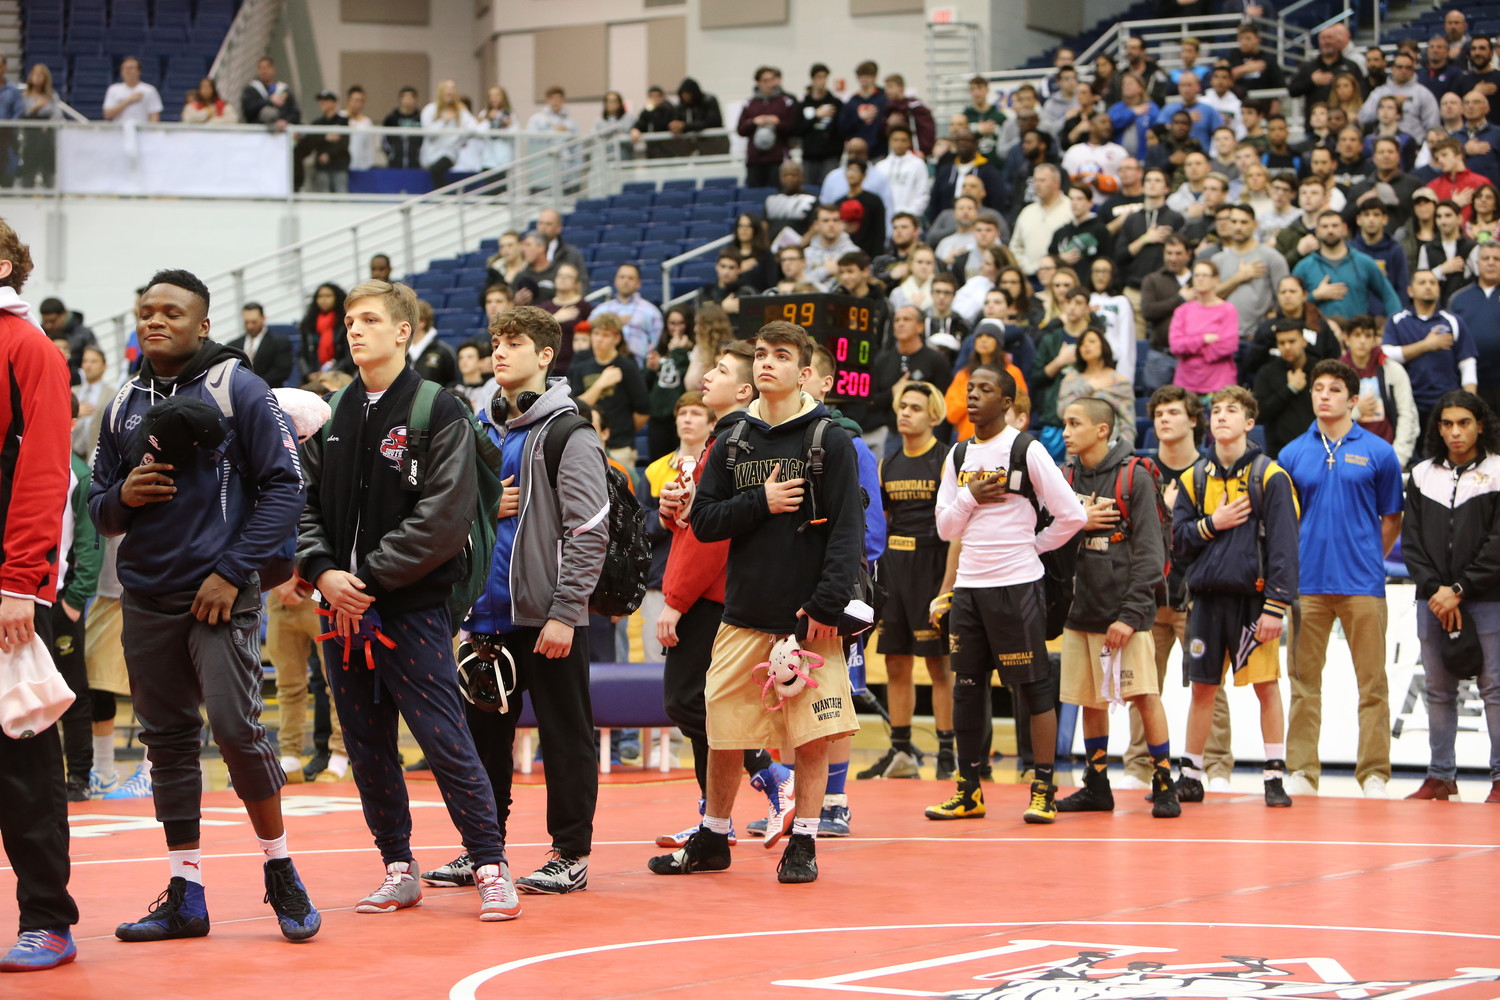 Vines, center, stood at attention for the flag with his fellow competitors. He, along with four of his teammates, would come back to the mat later in the night to win an individual county title.